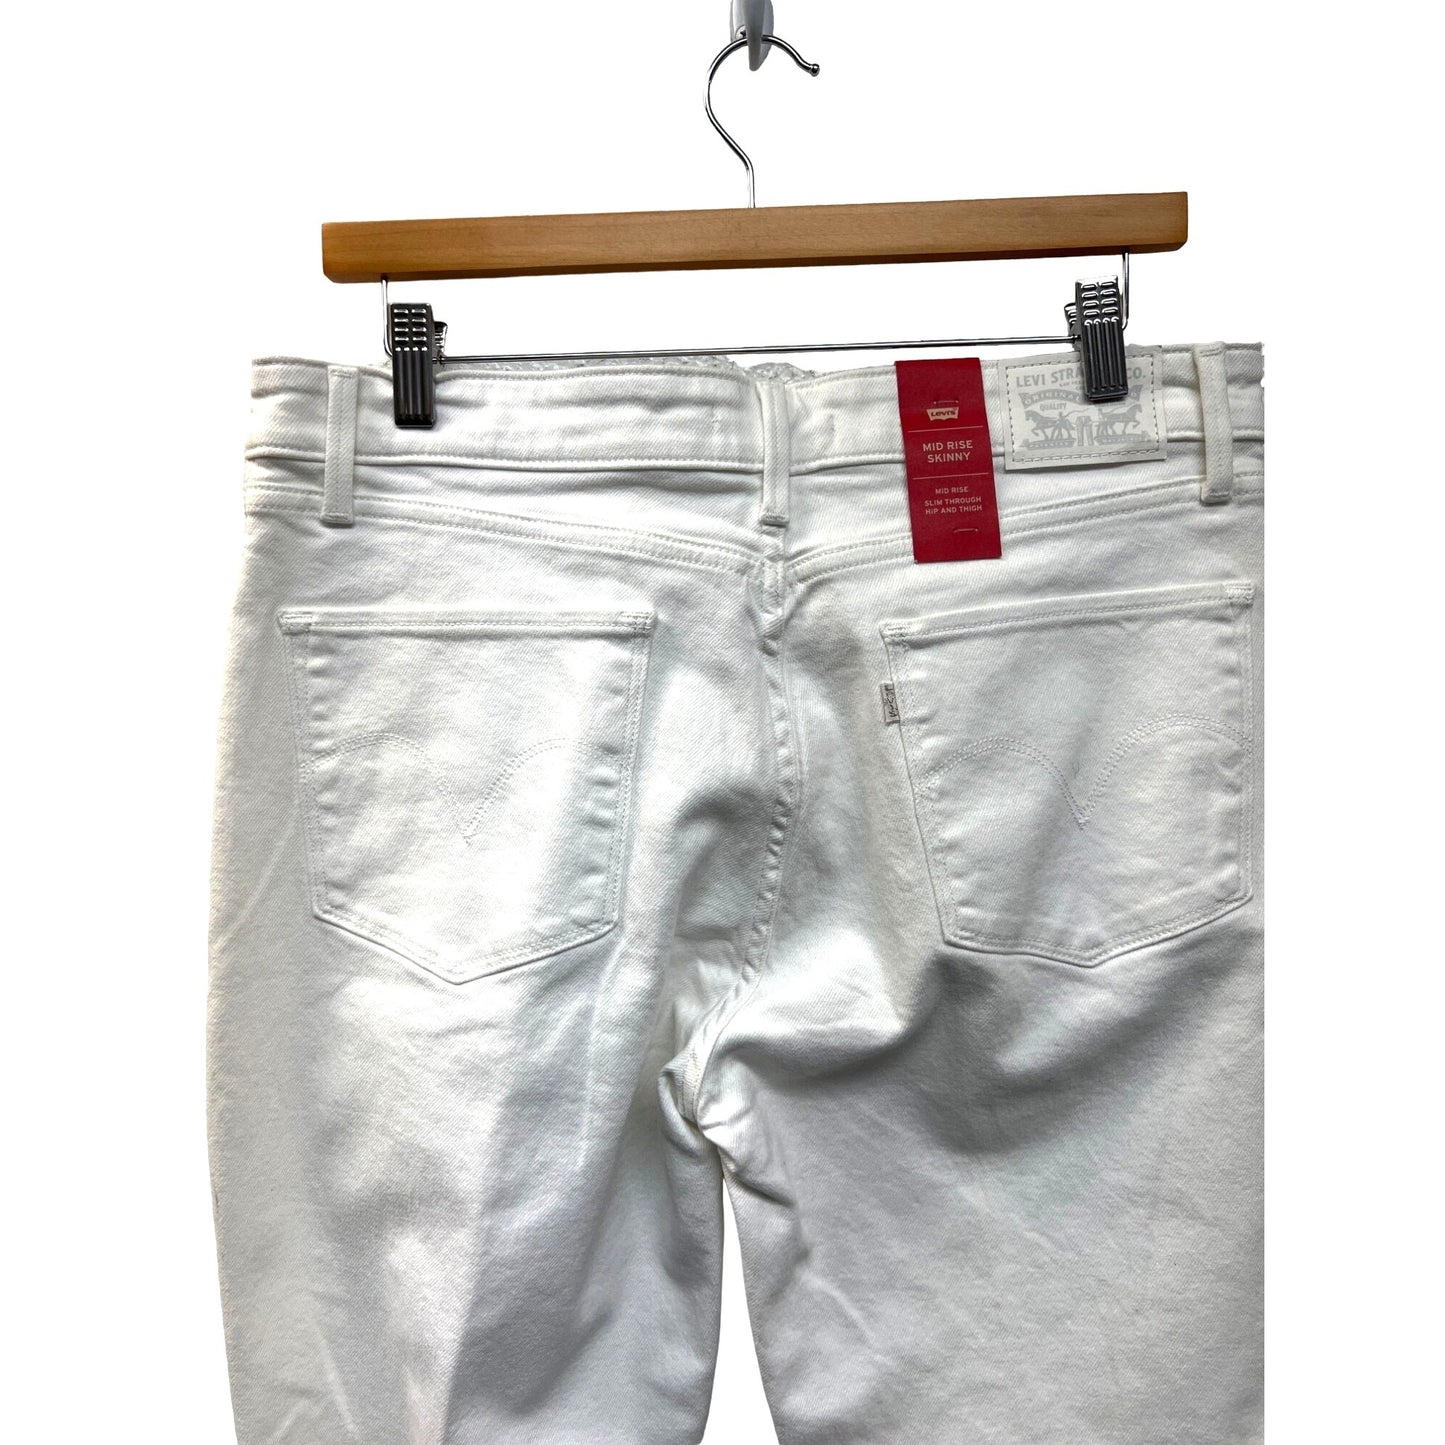 Levi's NWT Mid Rise Skinny White Jeans